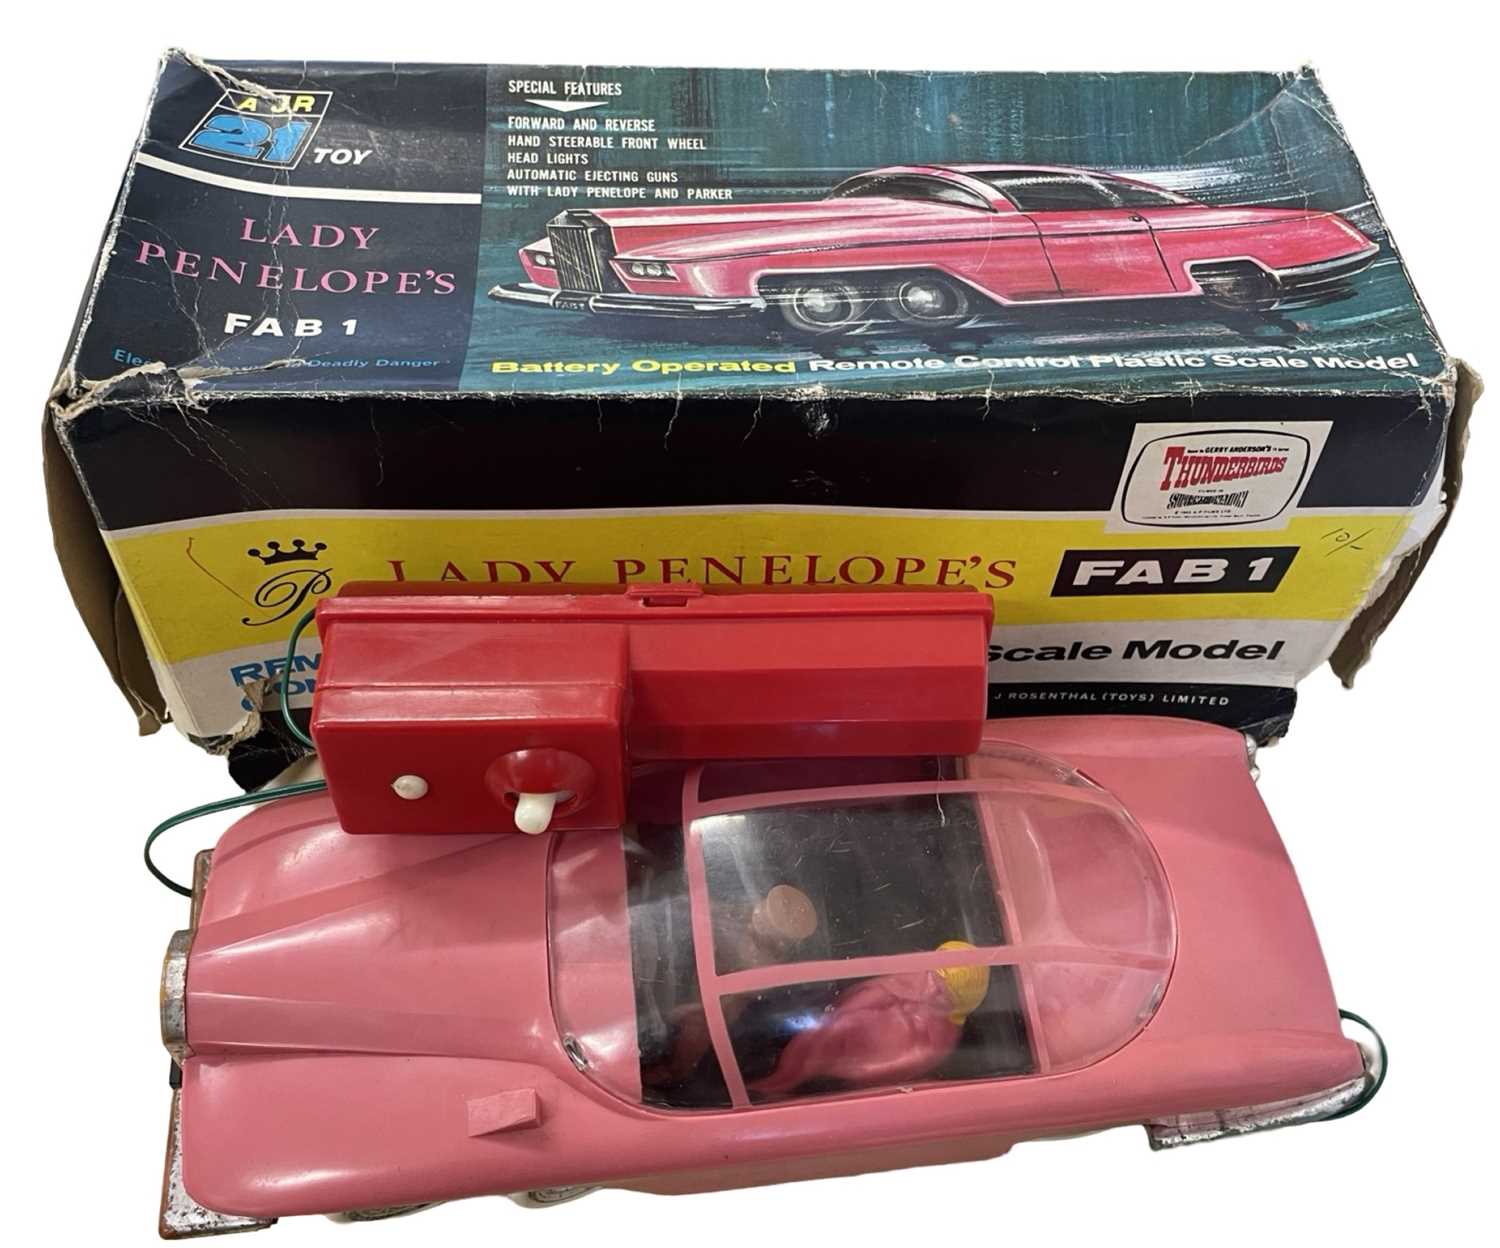 A remote controlled Lady Penelope's Fab 1 by J Rosenthal Toys, in original box